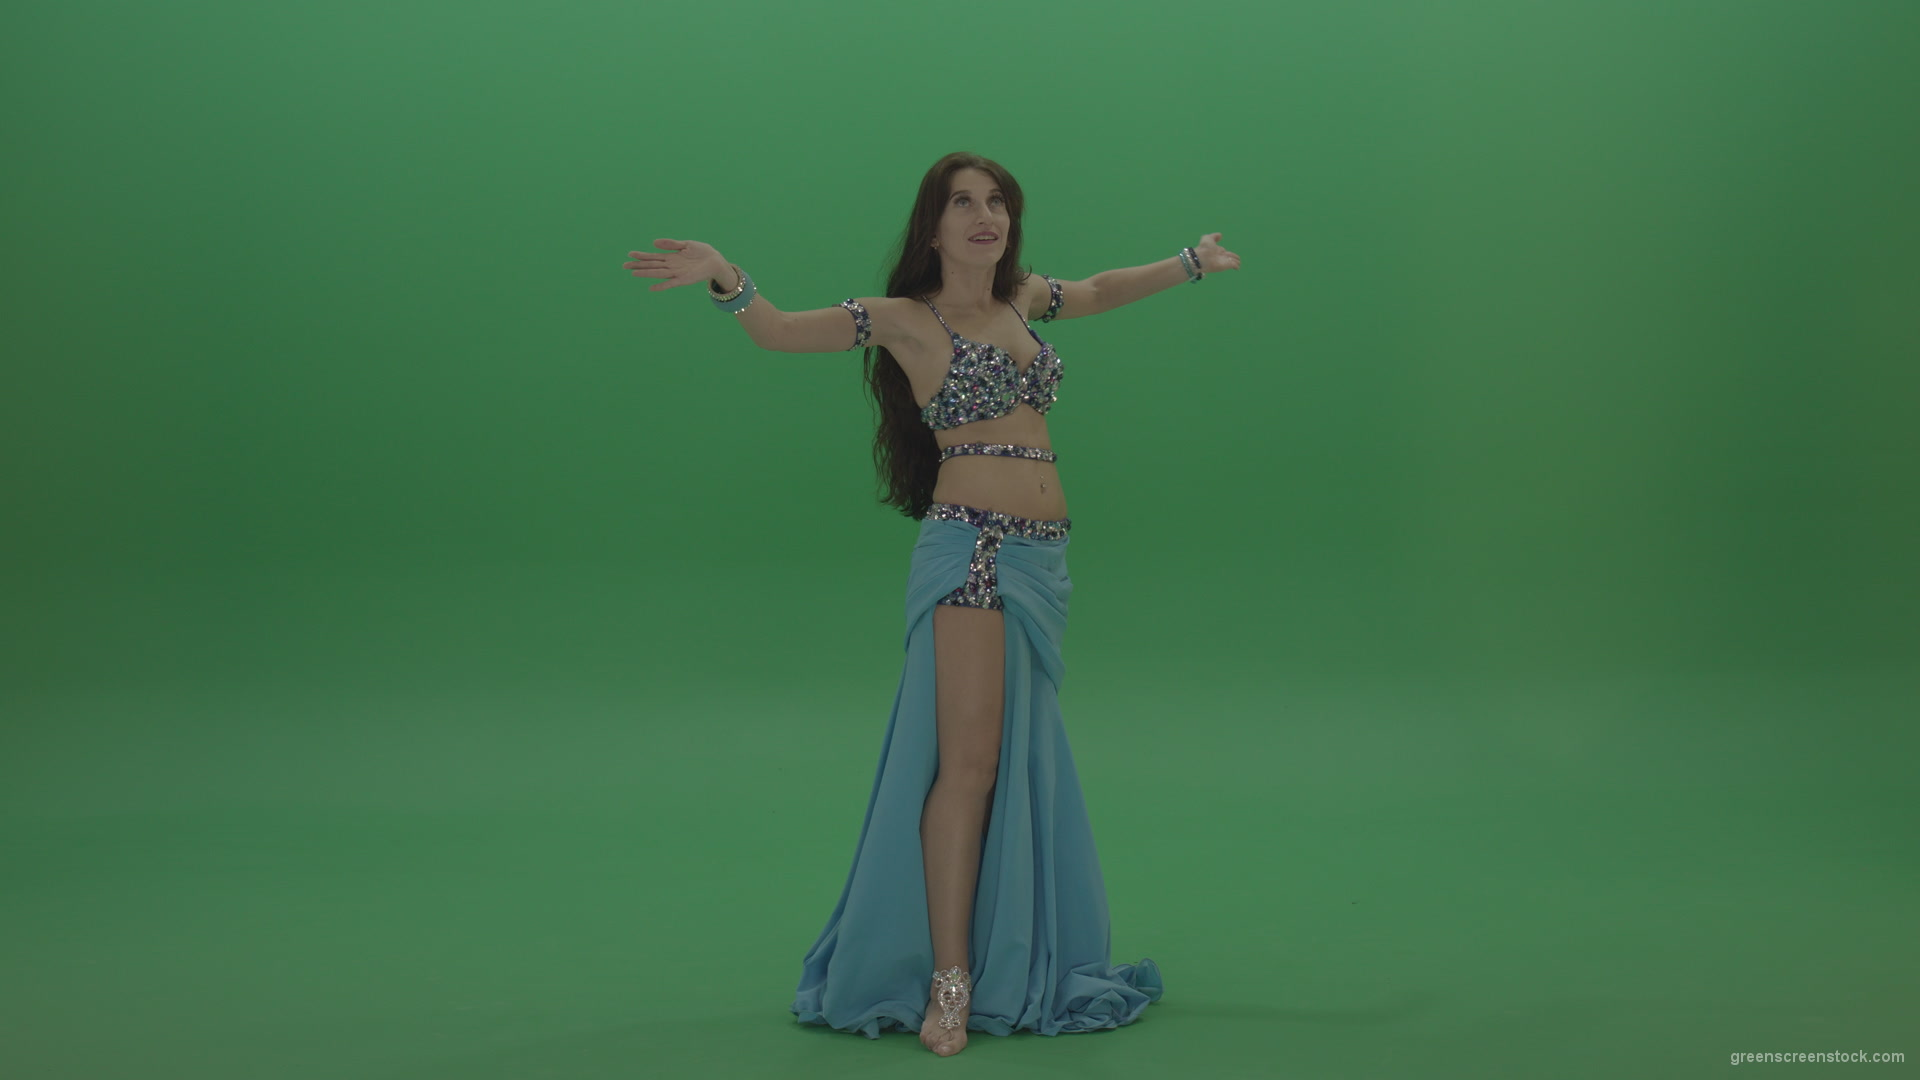 Awesome-belly-dancer-in-blue-wear-display-amazing-dance-moves-over-chromakey-background_004 Green Screen Stock